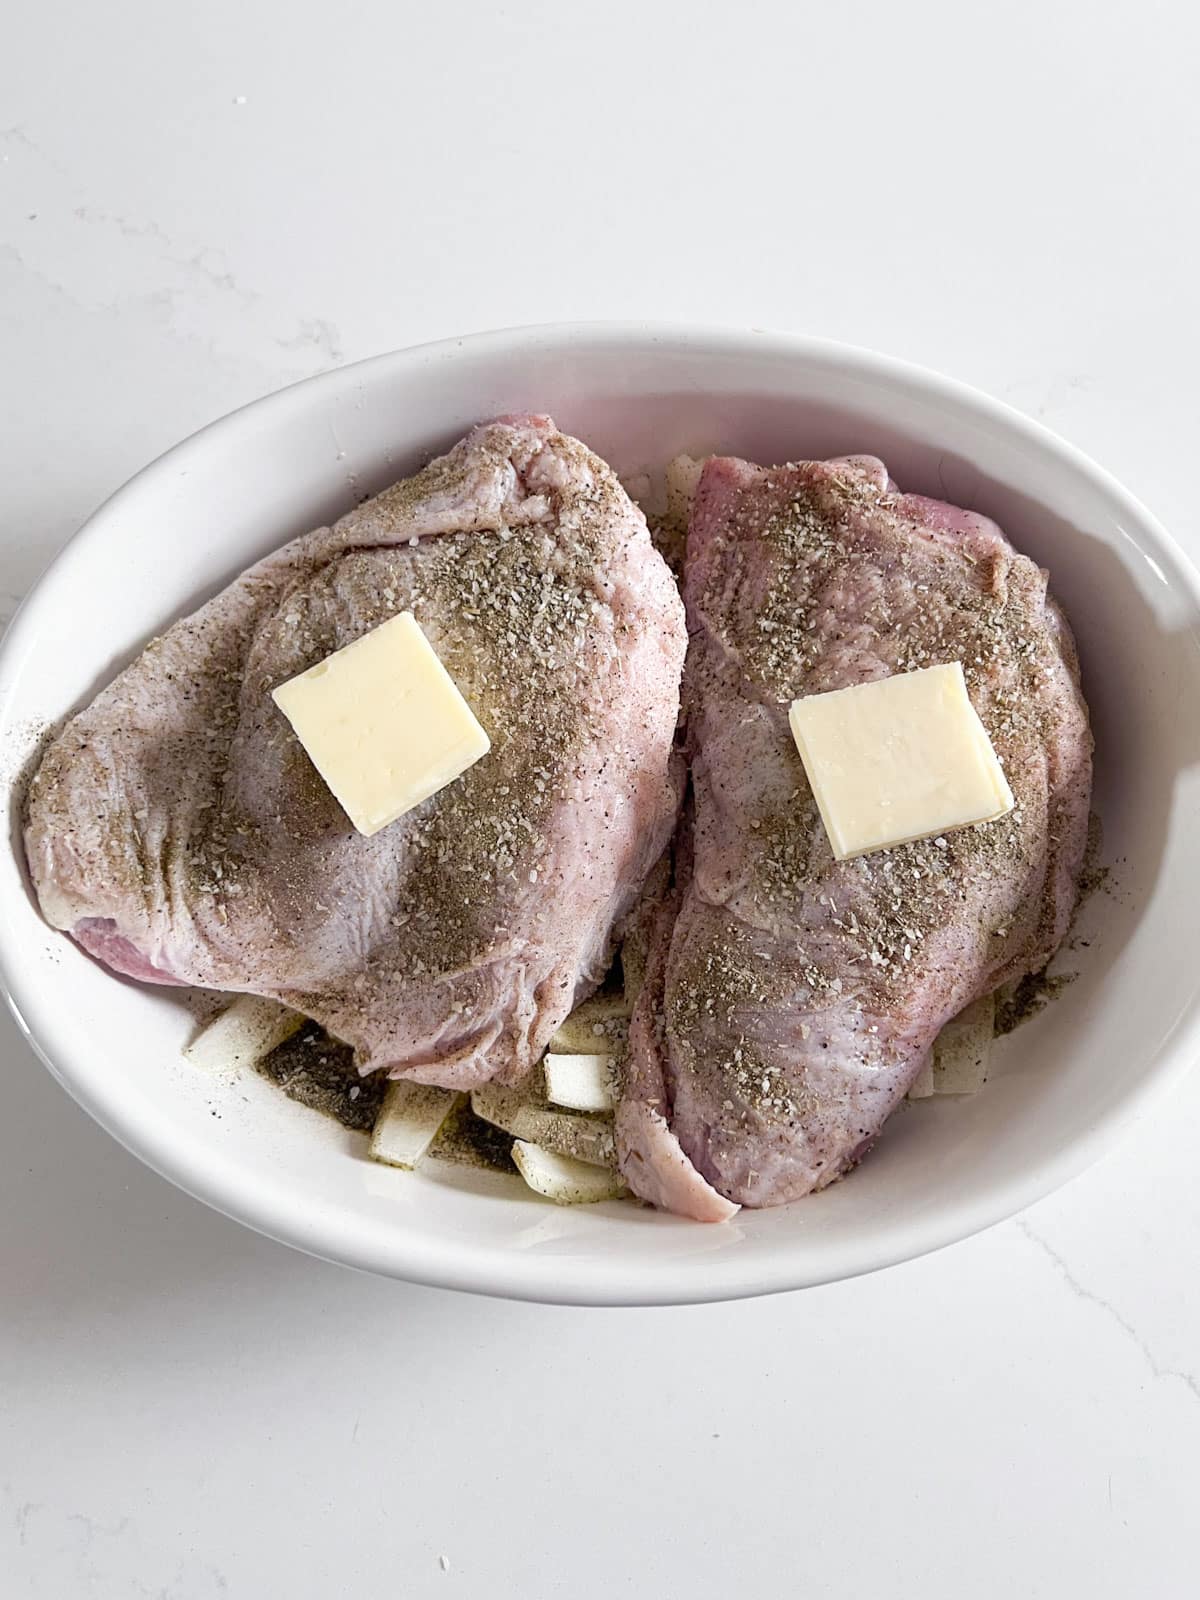 Pats of butter added to the top of the turkey thighs in a white oval baking pan.